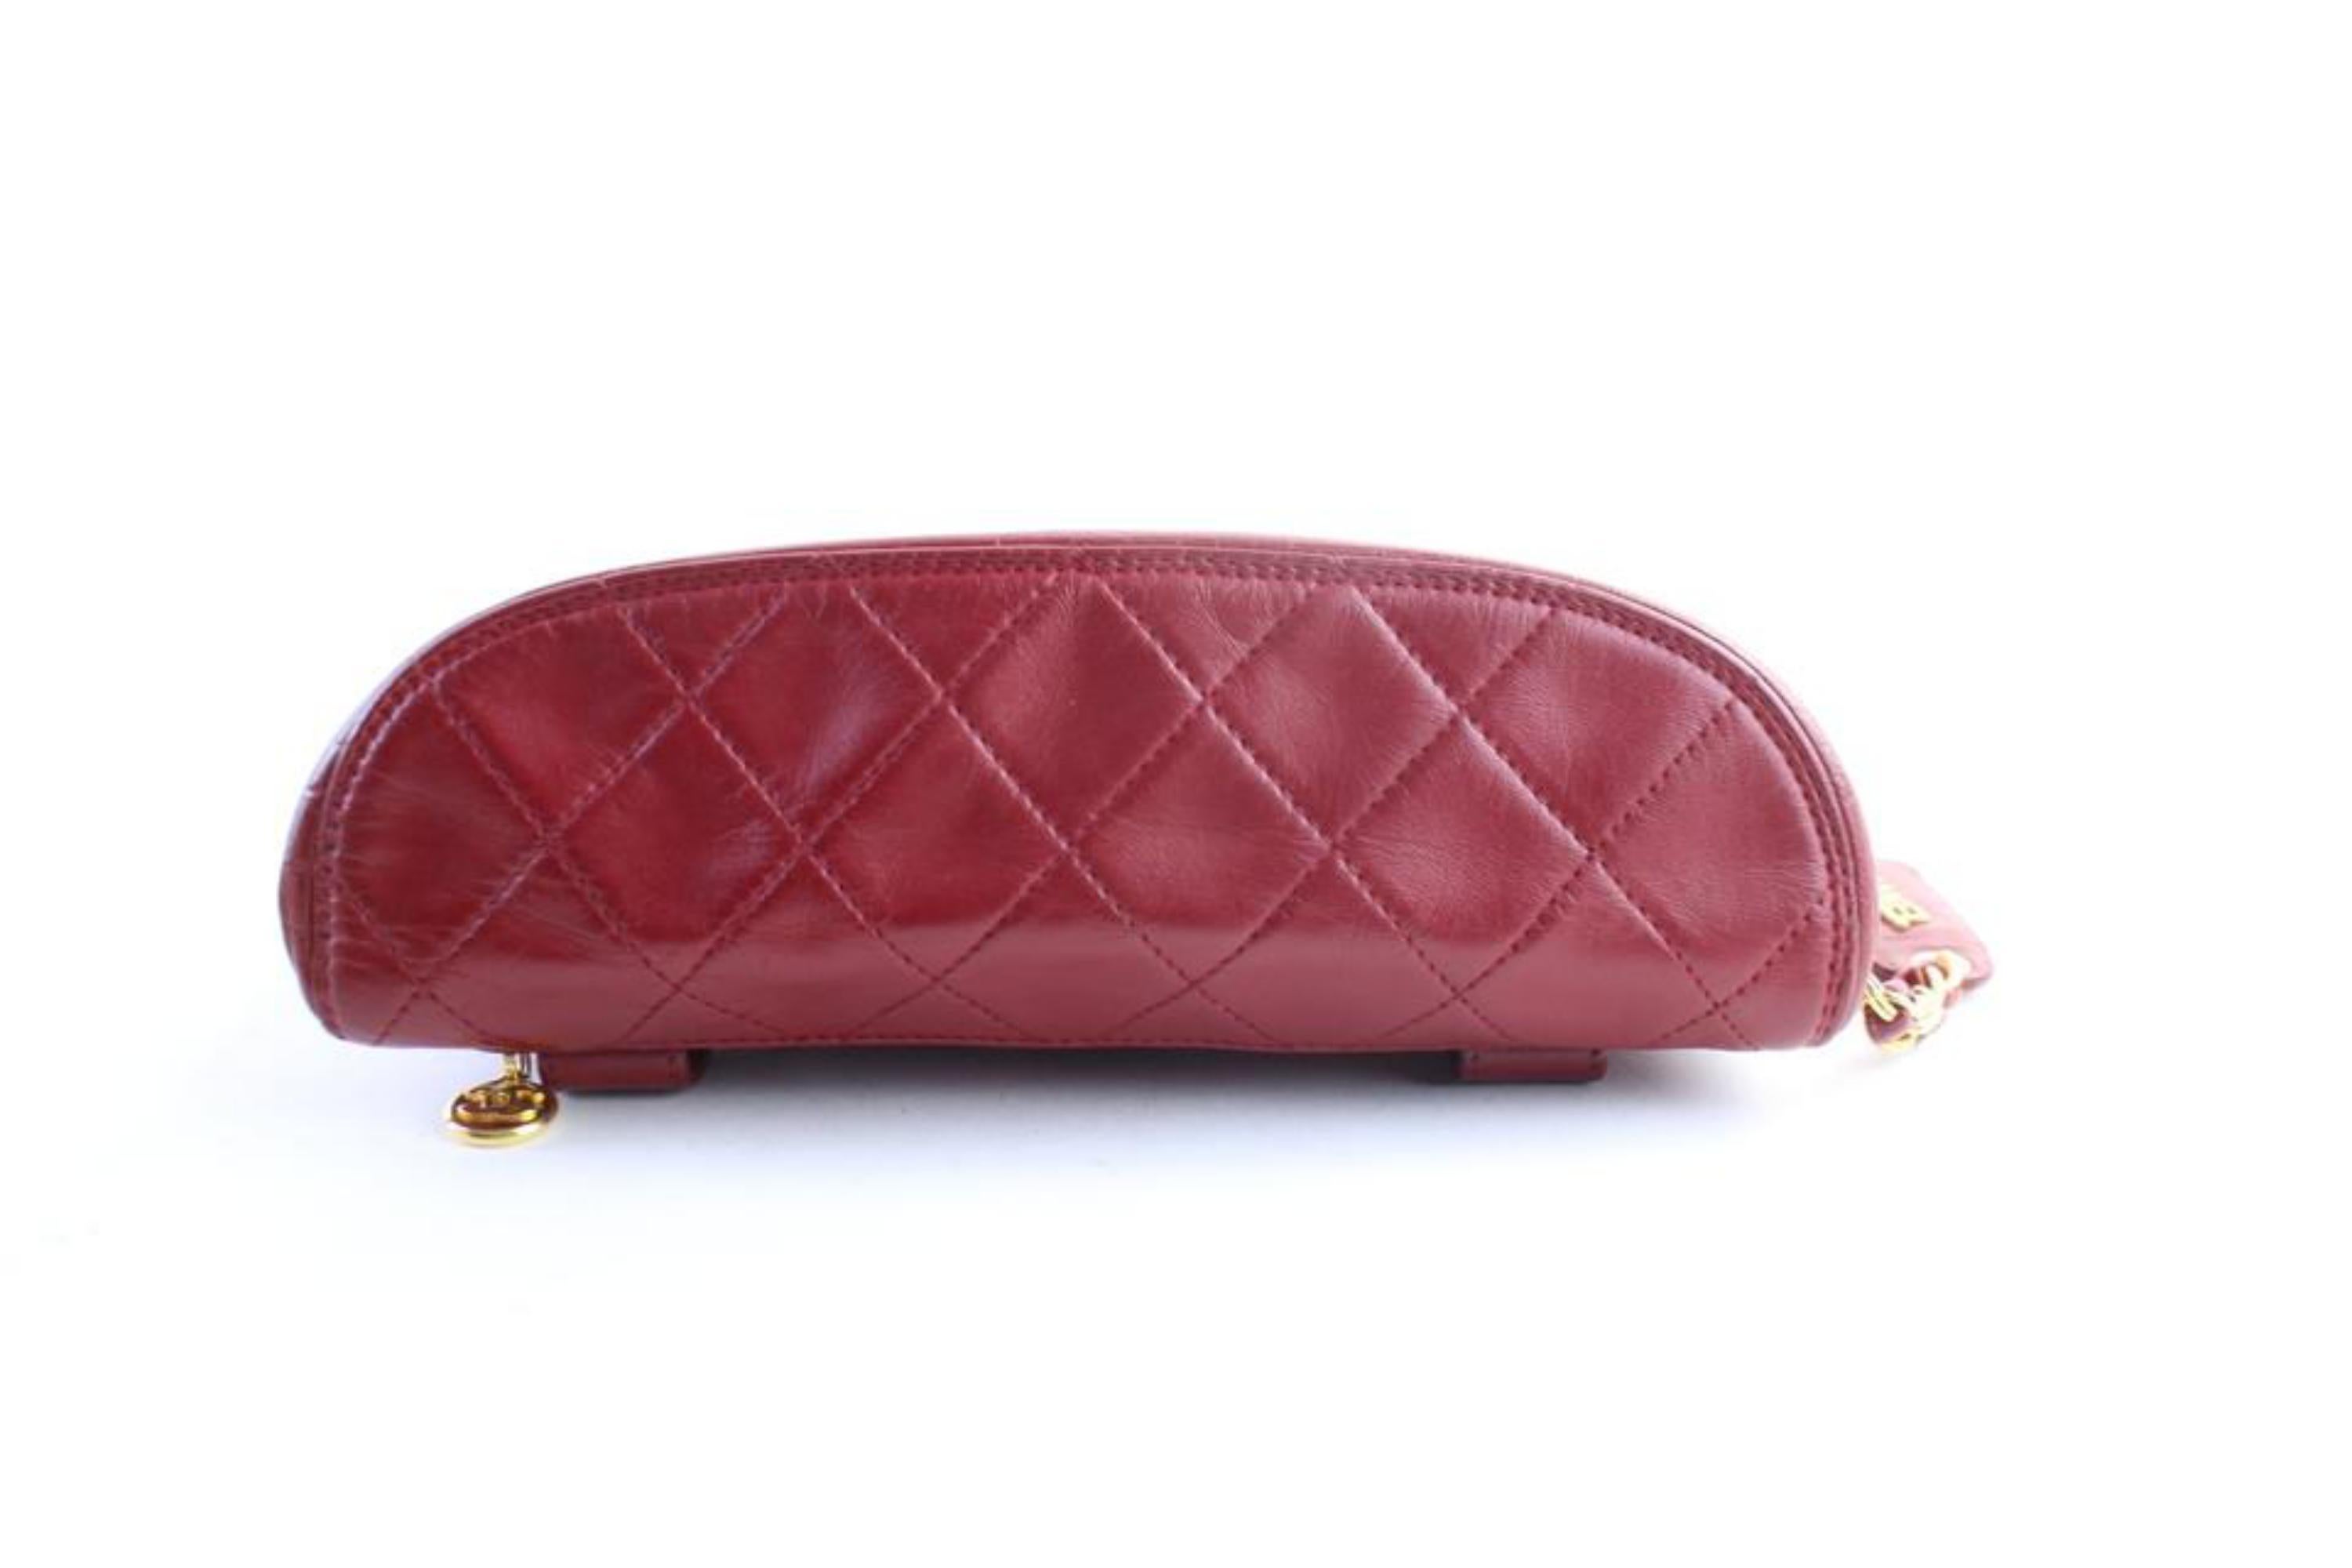 Chanel Fanny Pack Waist Pouch 1cr0703 Red Quilted Leather Cross Body Bag For Sale 6